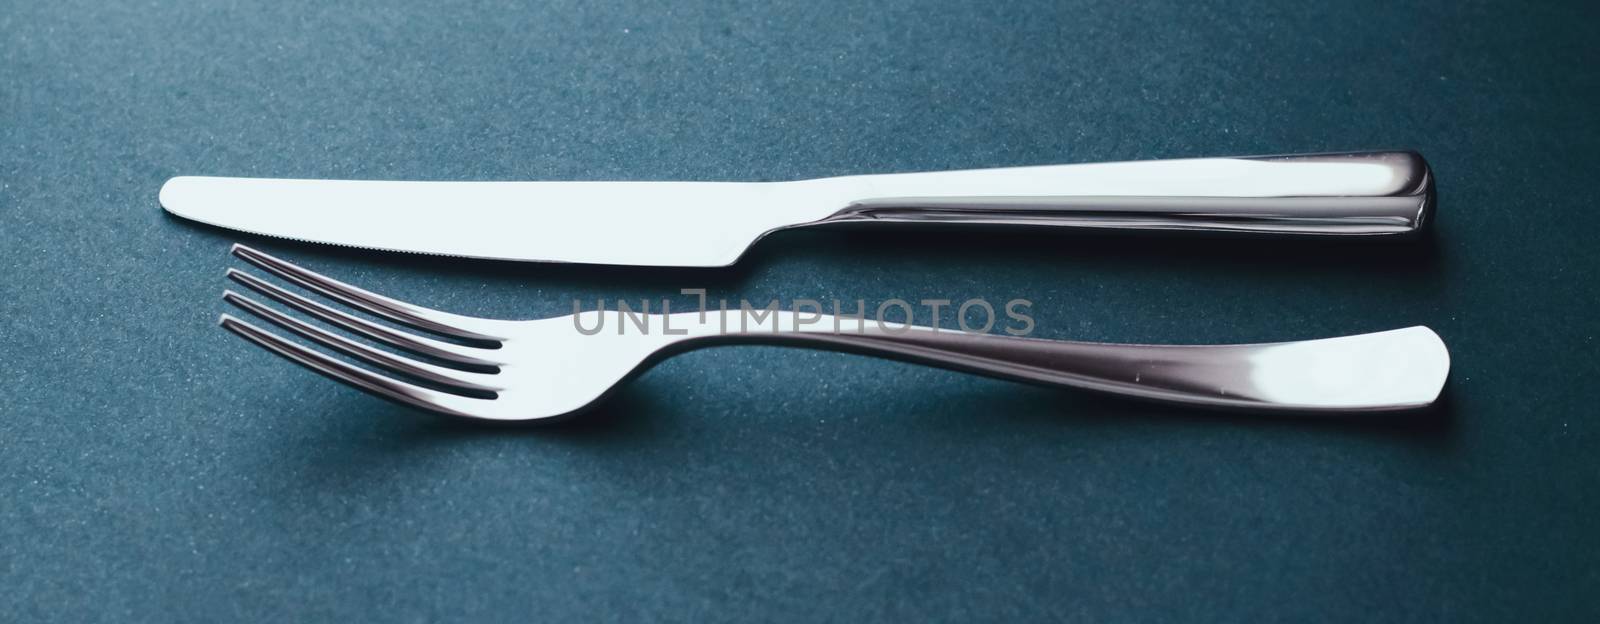 Fork and knife, silver cutlery for table decor, minimalistic design and diet by Anneleven